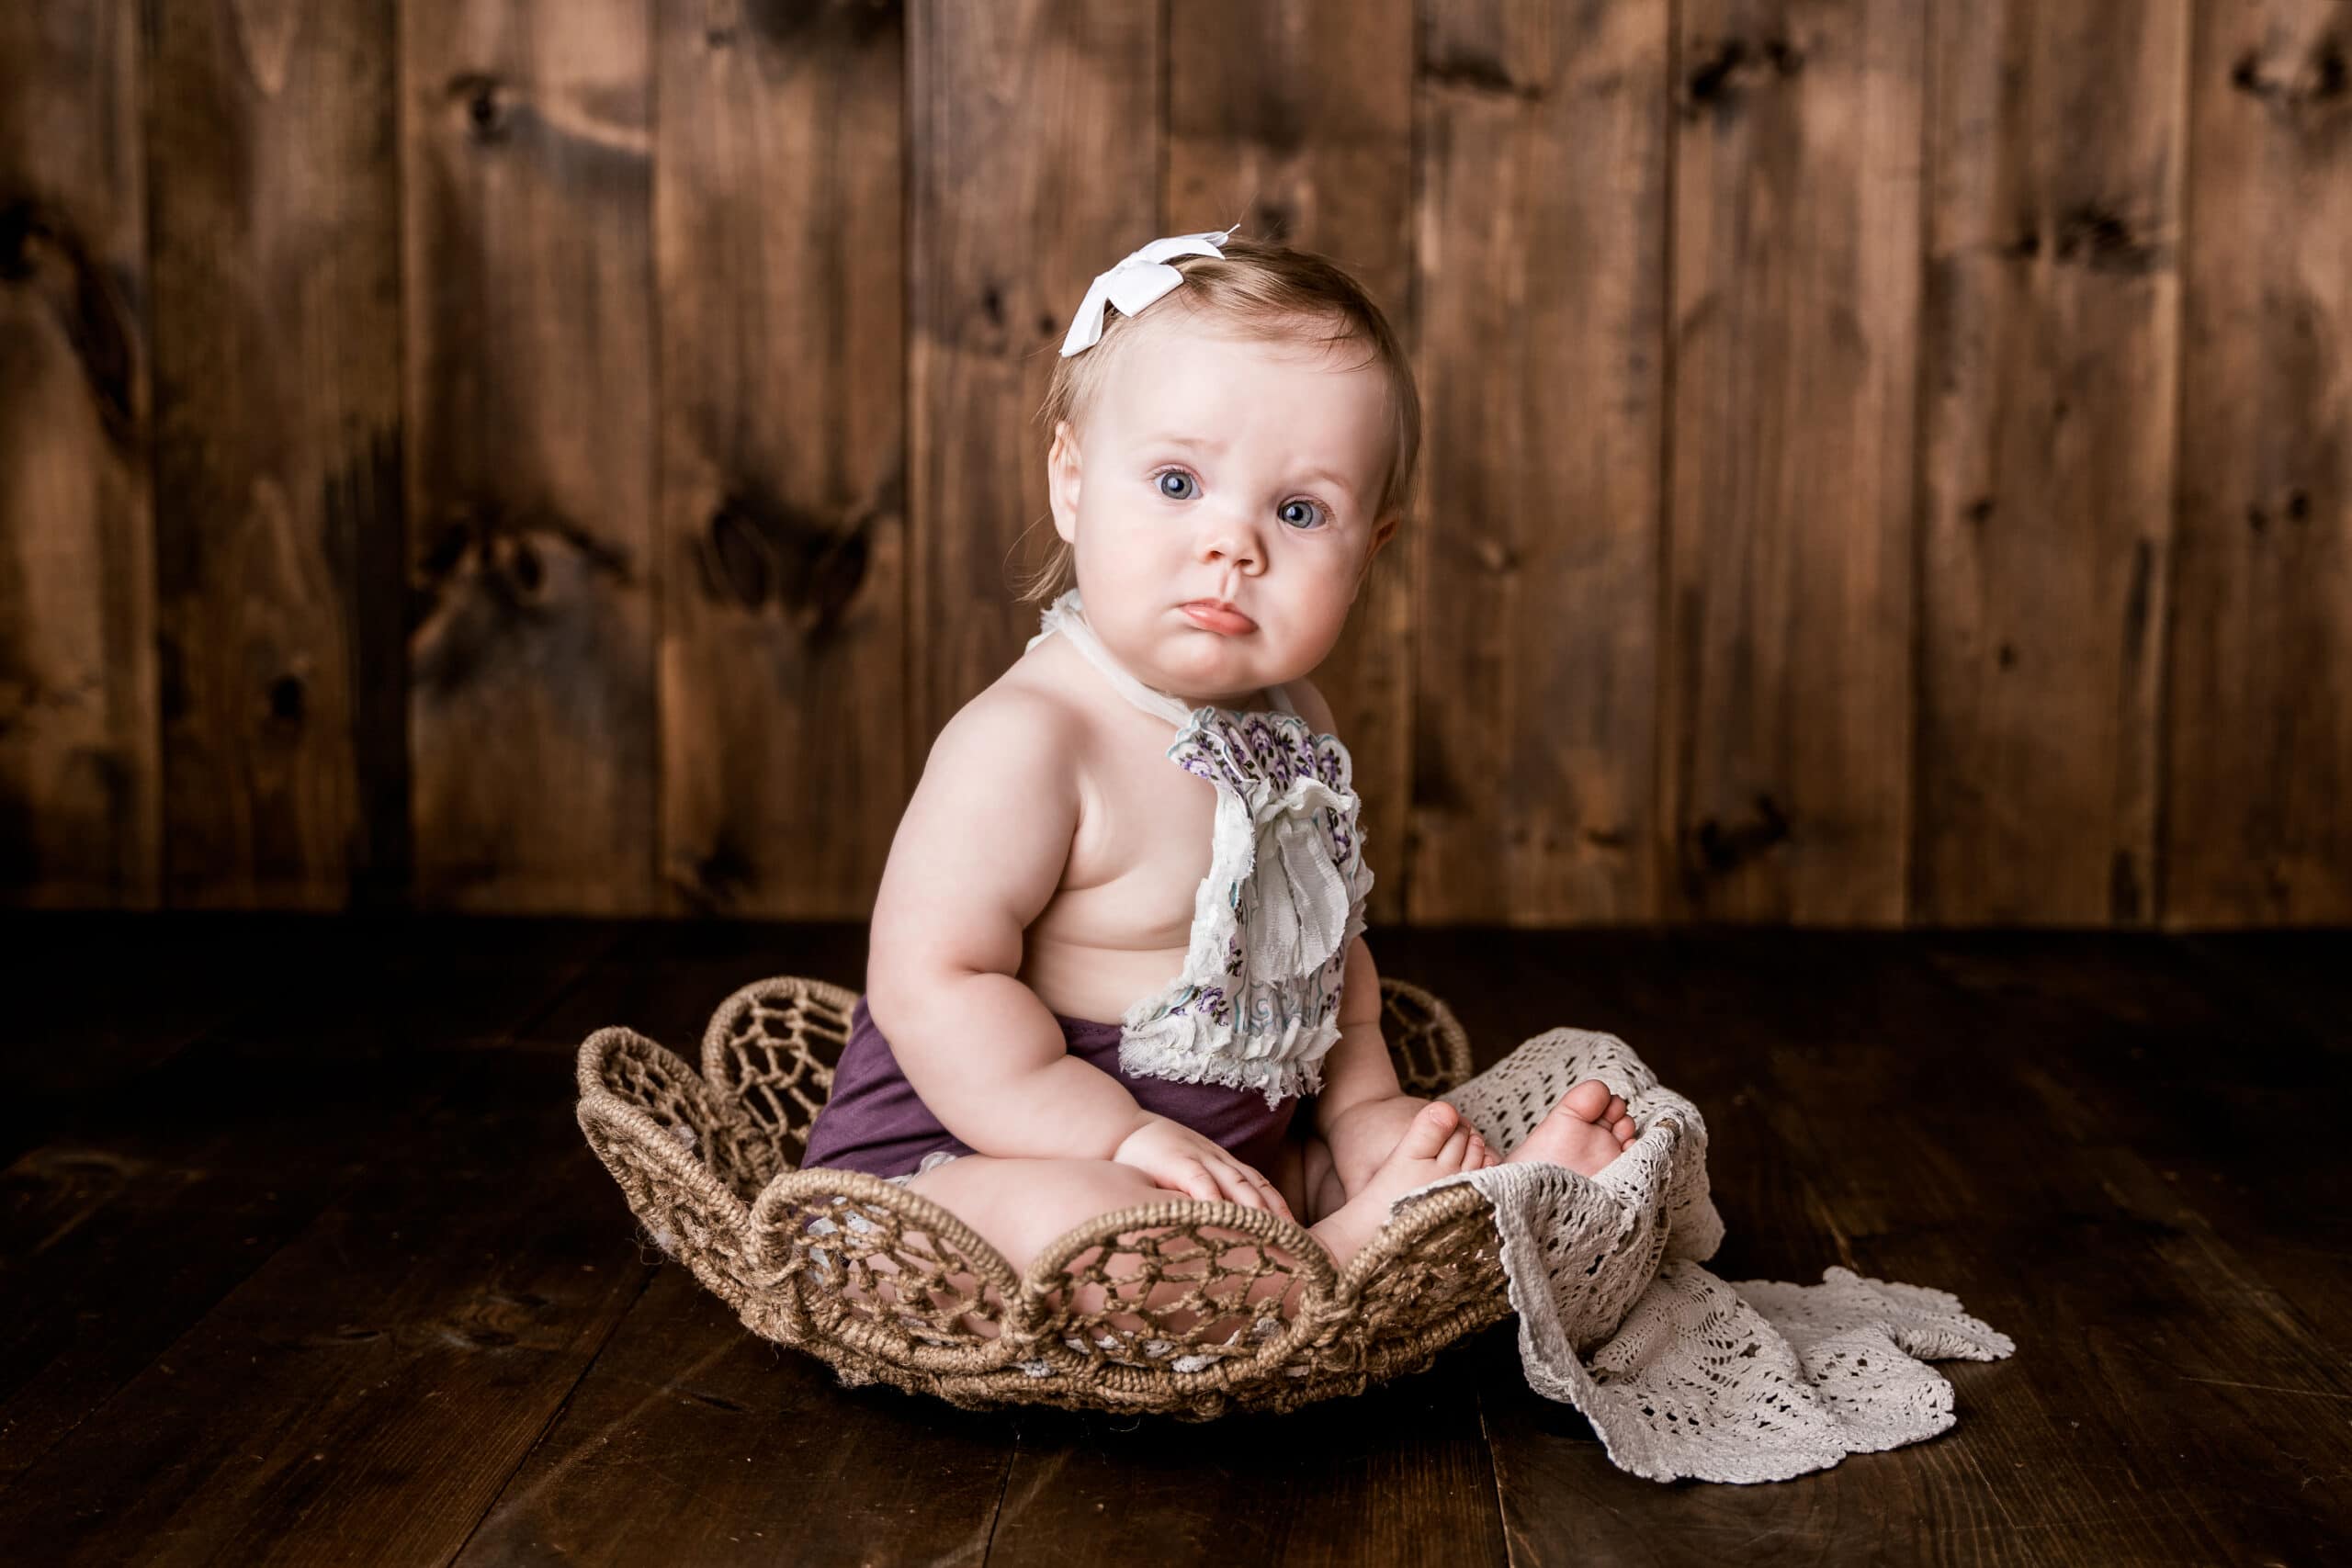 Moor Preset Pack, a lightened and edited image, a baby girl sits up in a small wicker basket